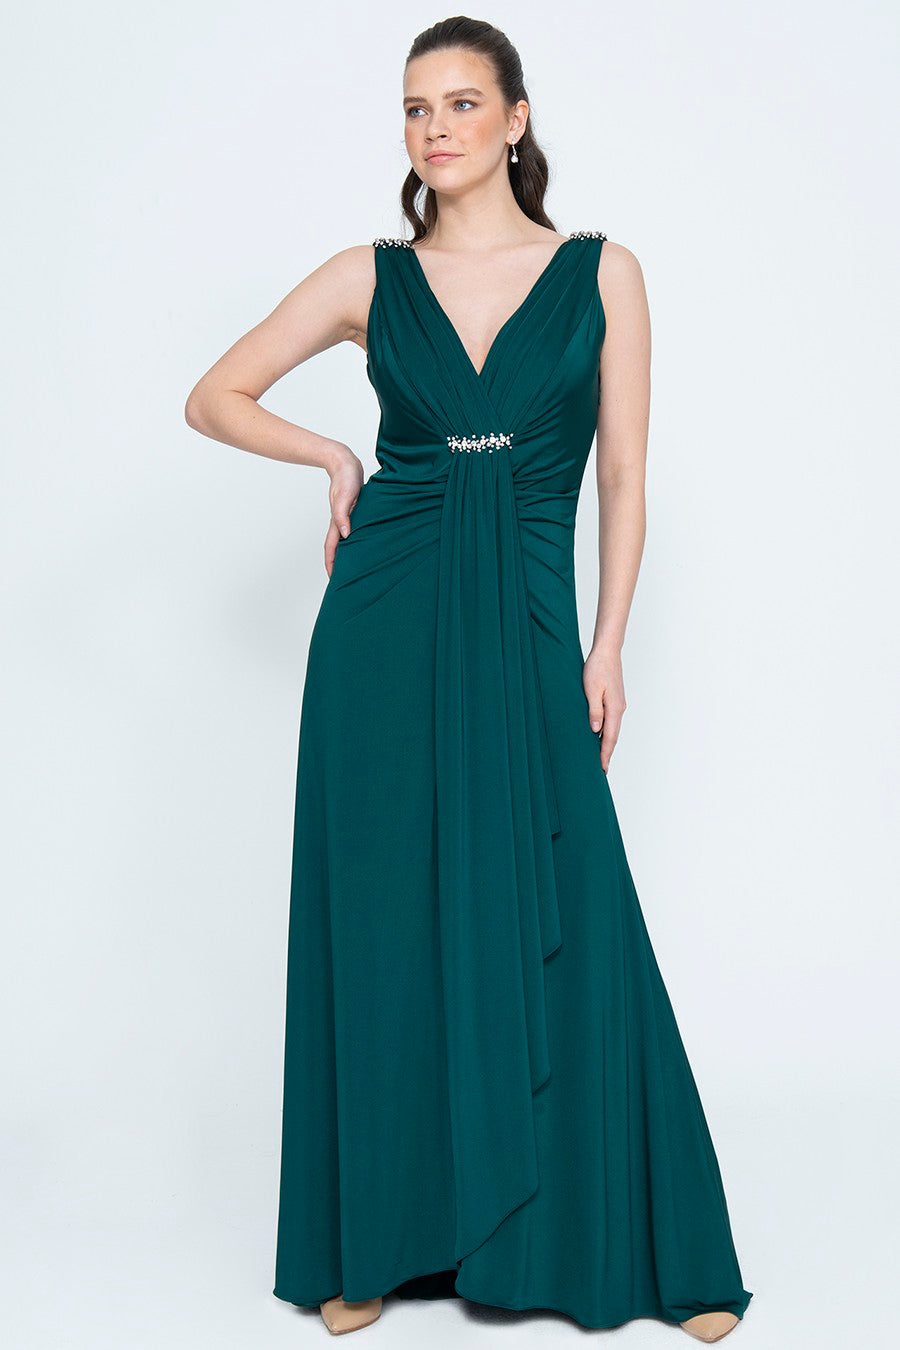 Lily - Mystic Evenings | Evening and Prom Dresses